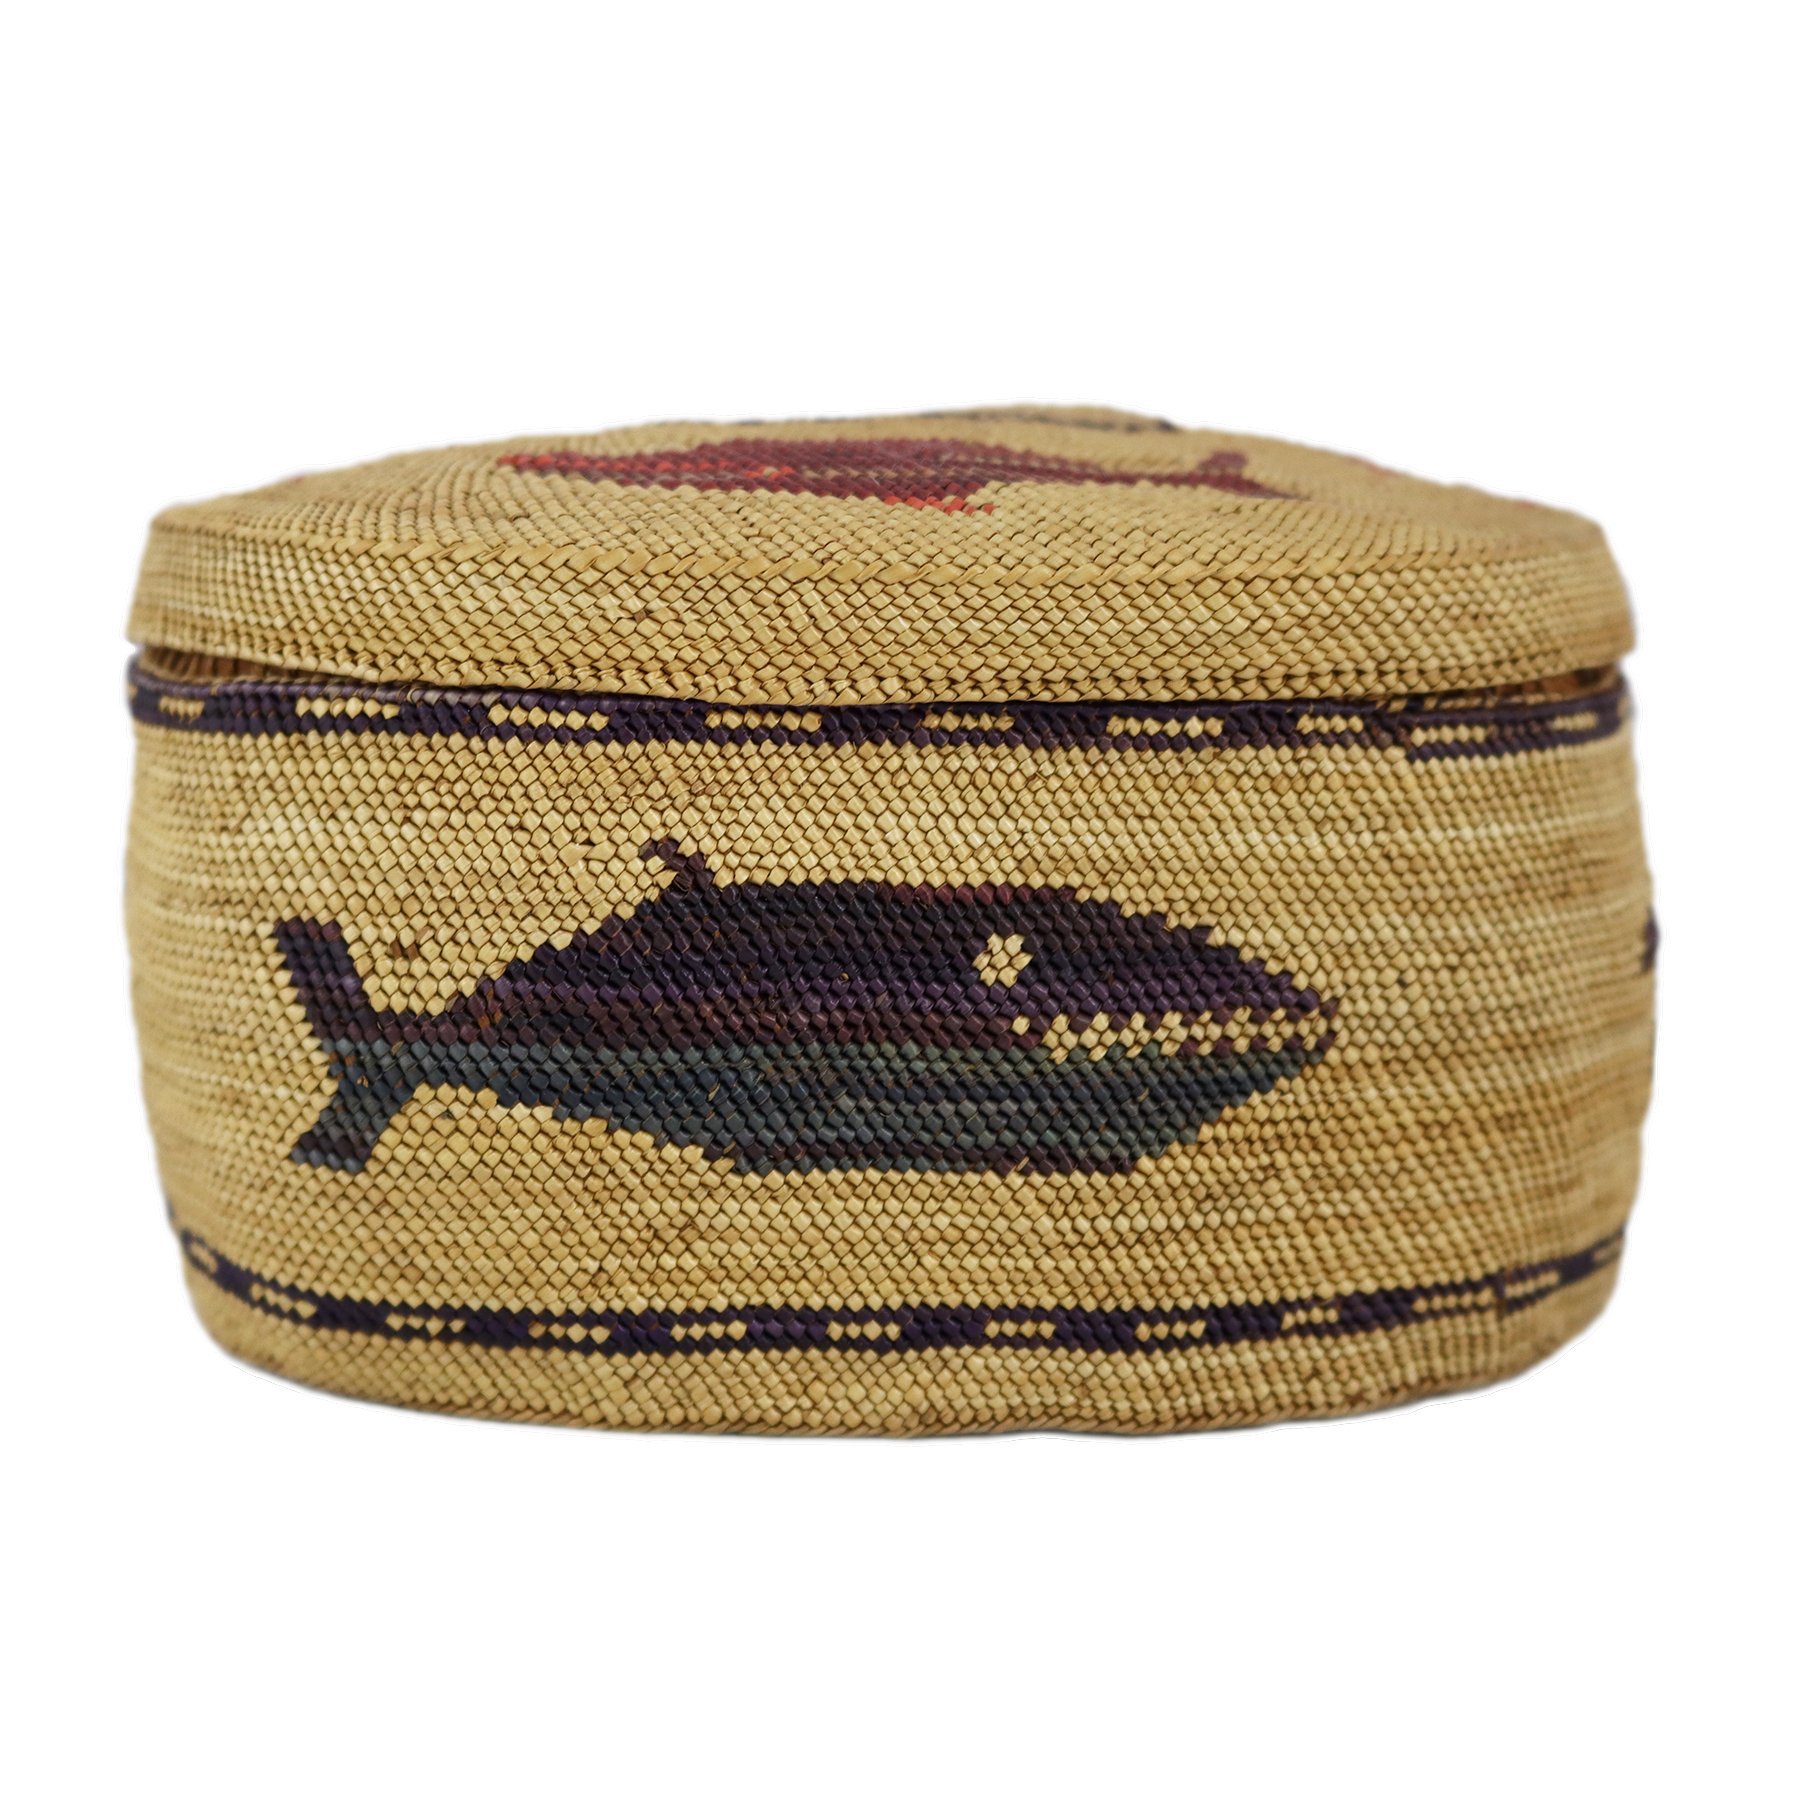 Fine Oval Nootka Sweetgrass Basket with Domed Lid, early 20th century